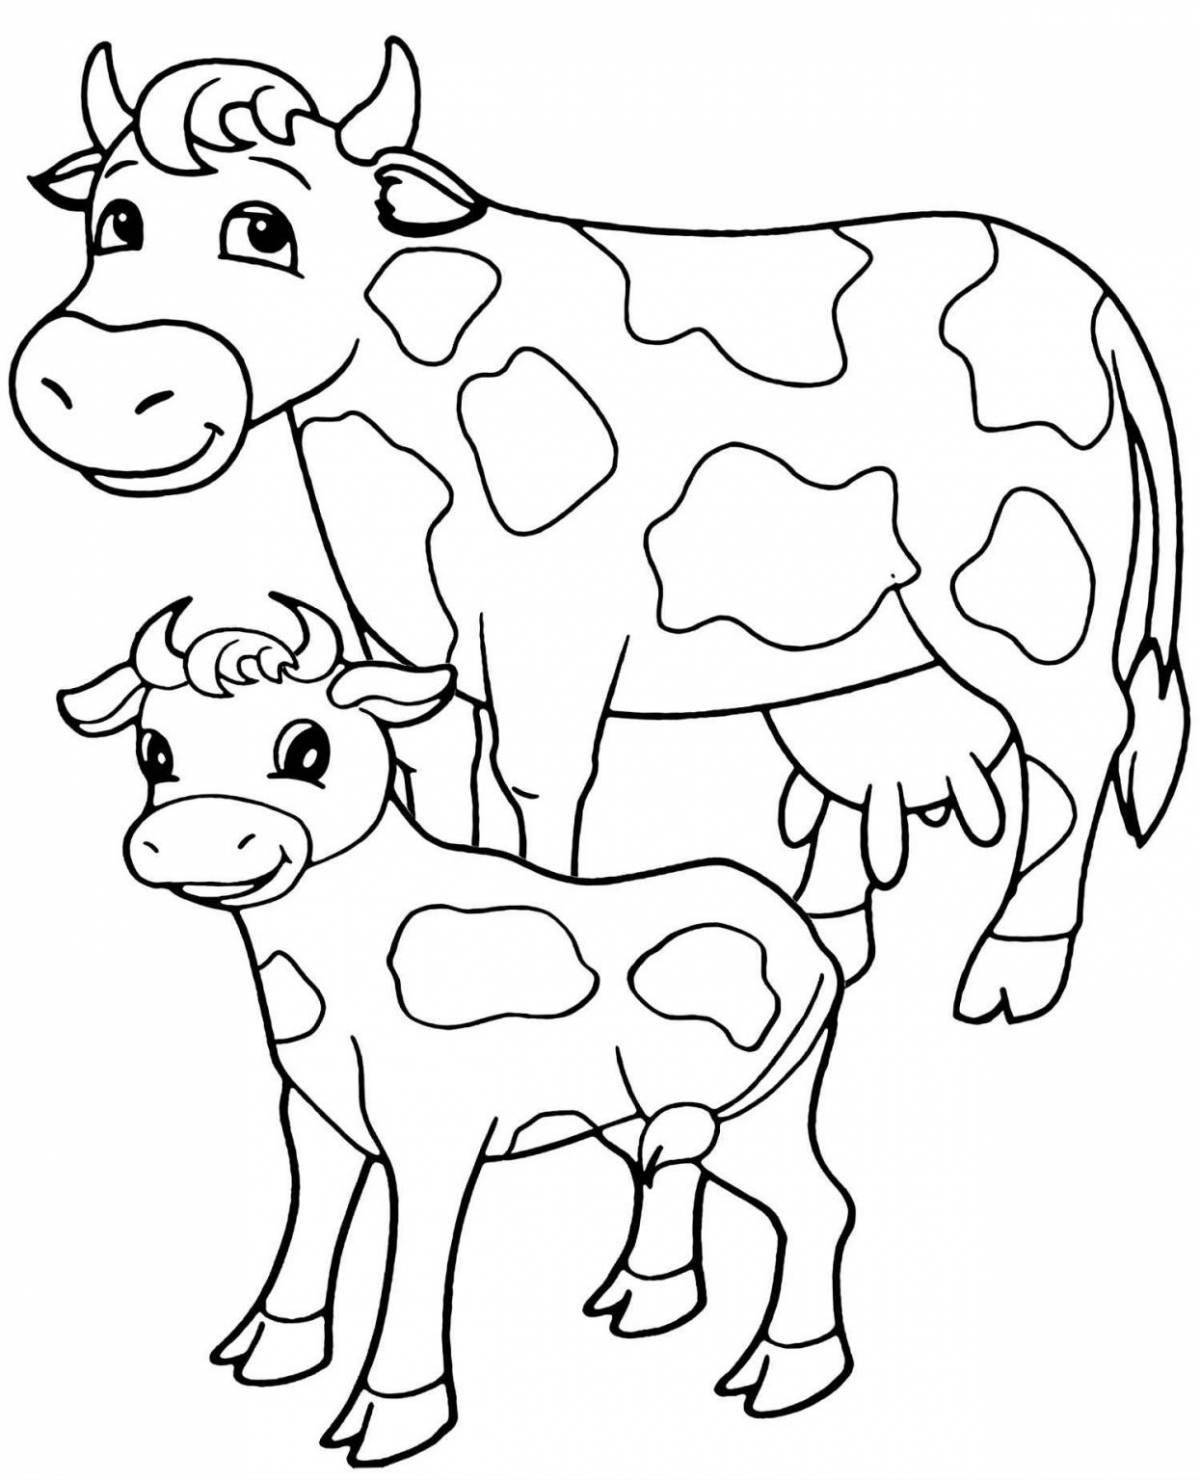 Violent cow coloring book for children 4-5 years old